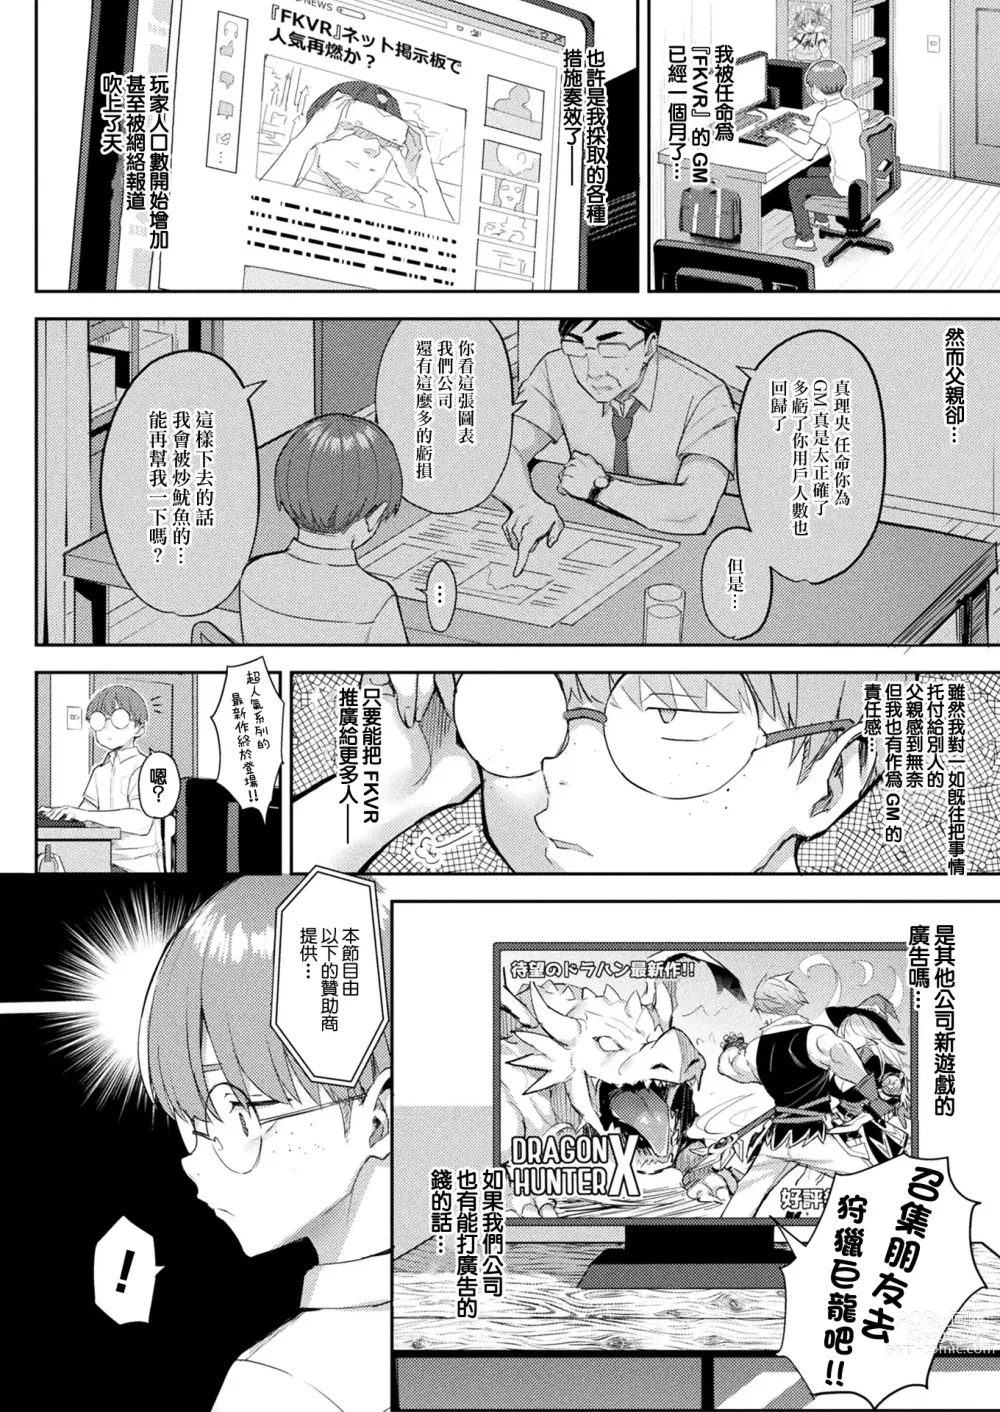 Page 2 of manga In Moral Gamemaster Ch. 5